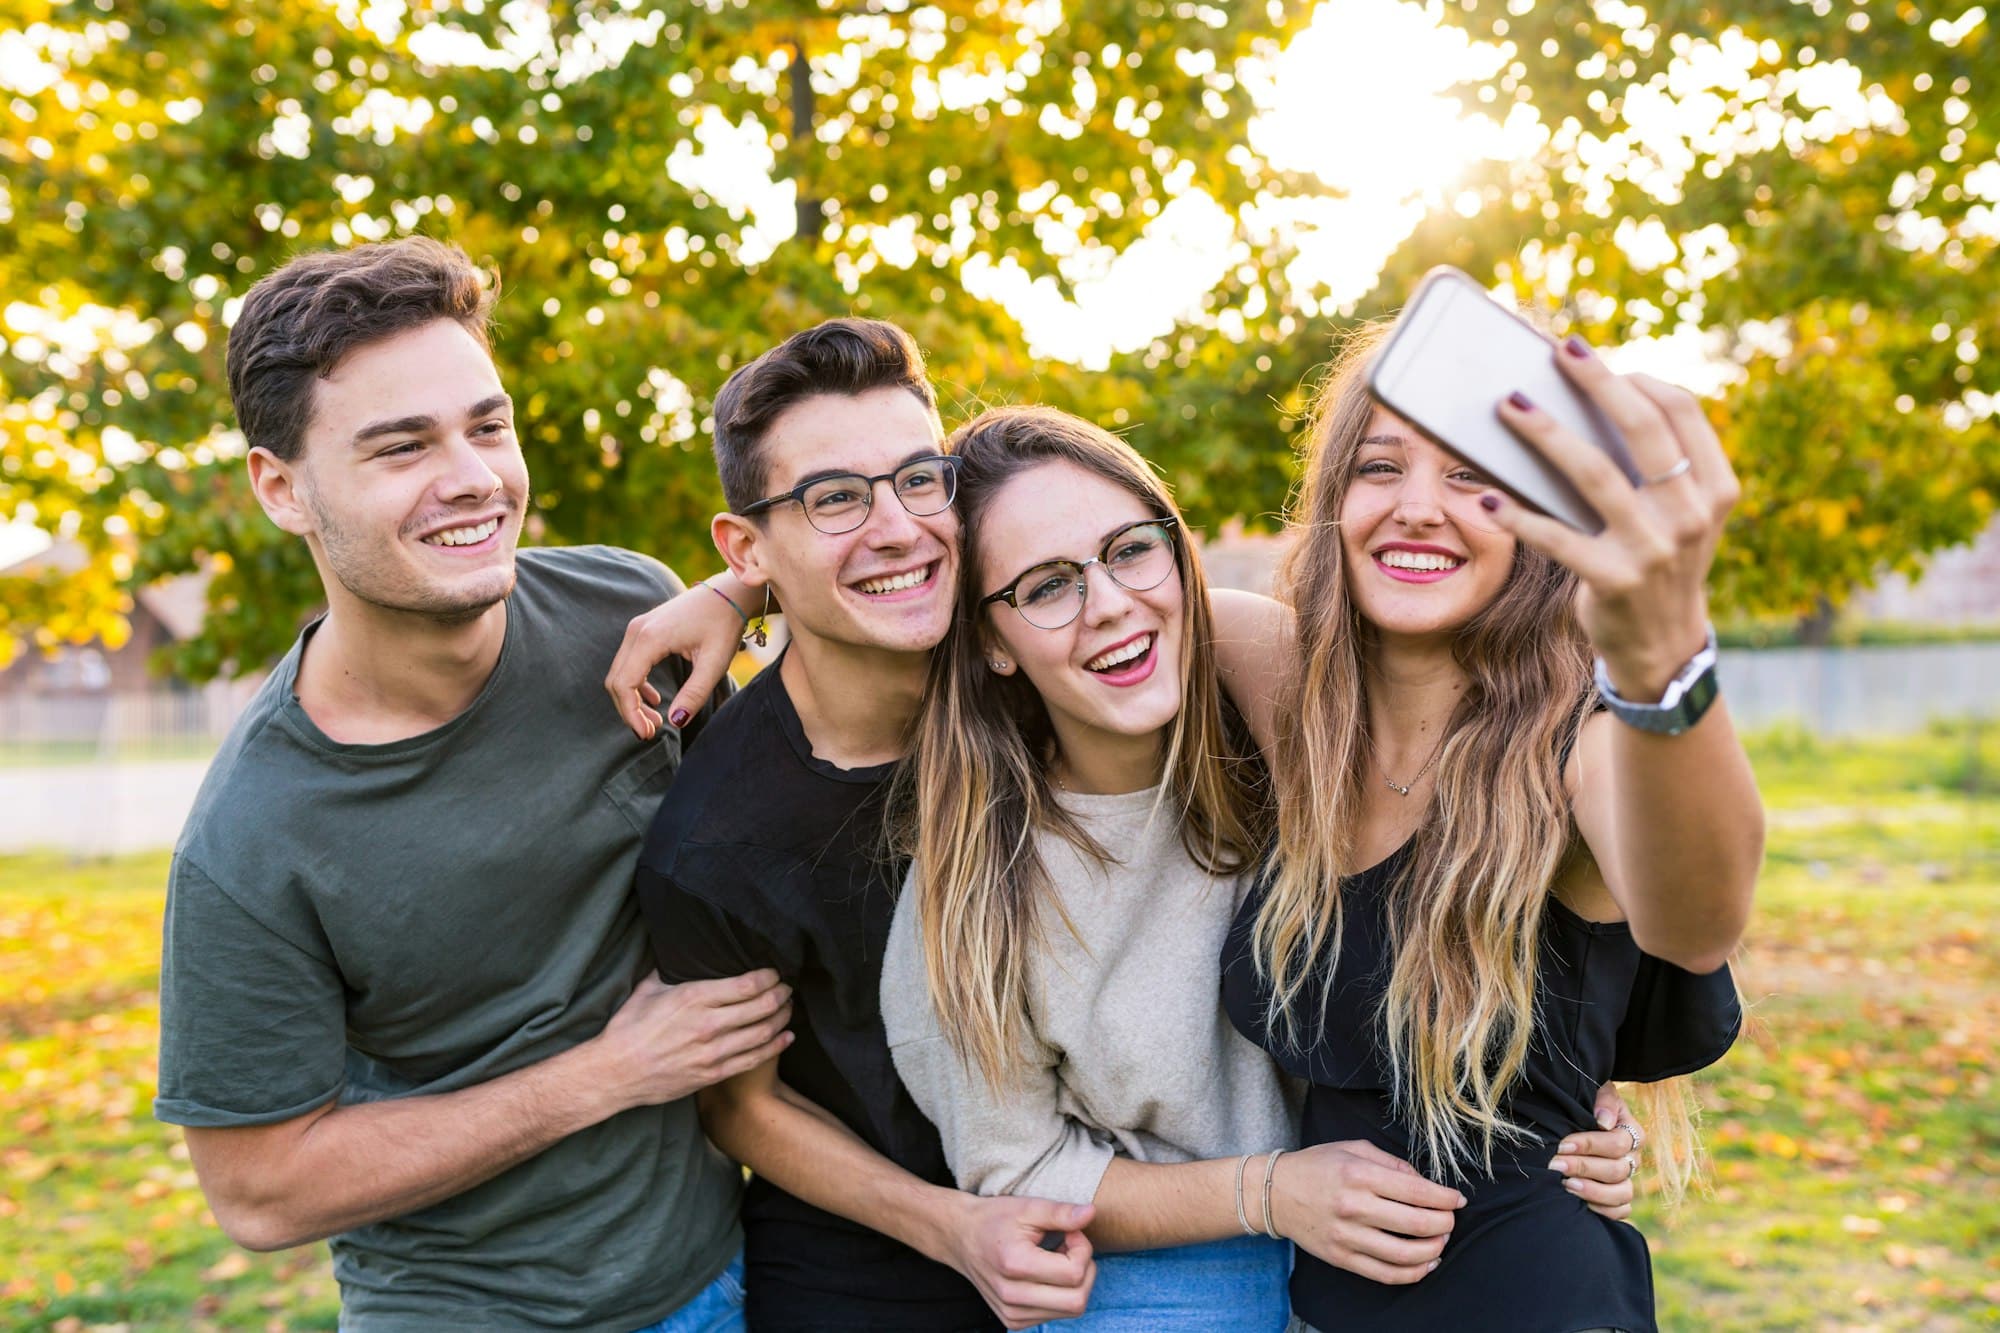 Teen friends at park taking a selfie and having fun